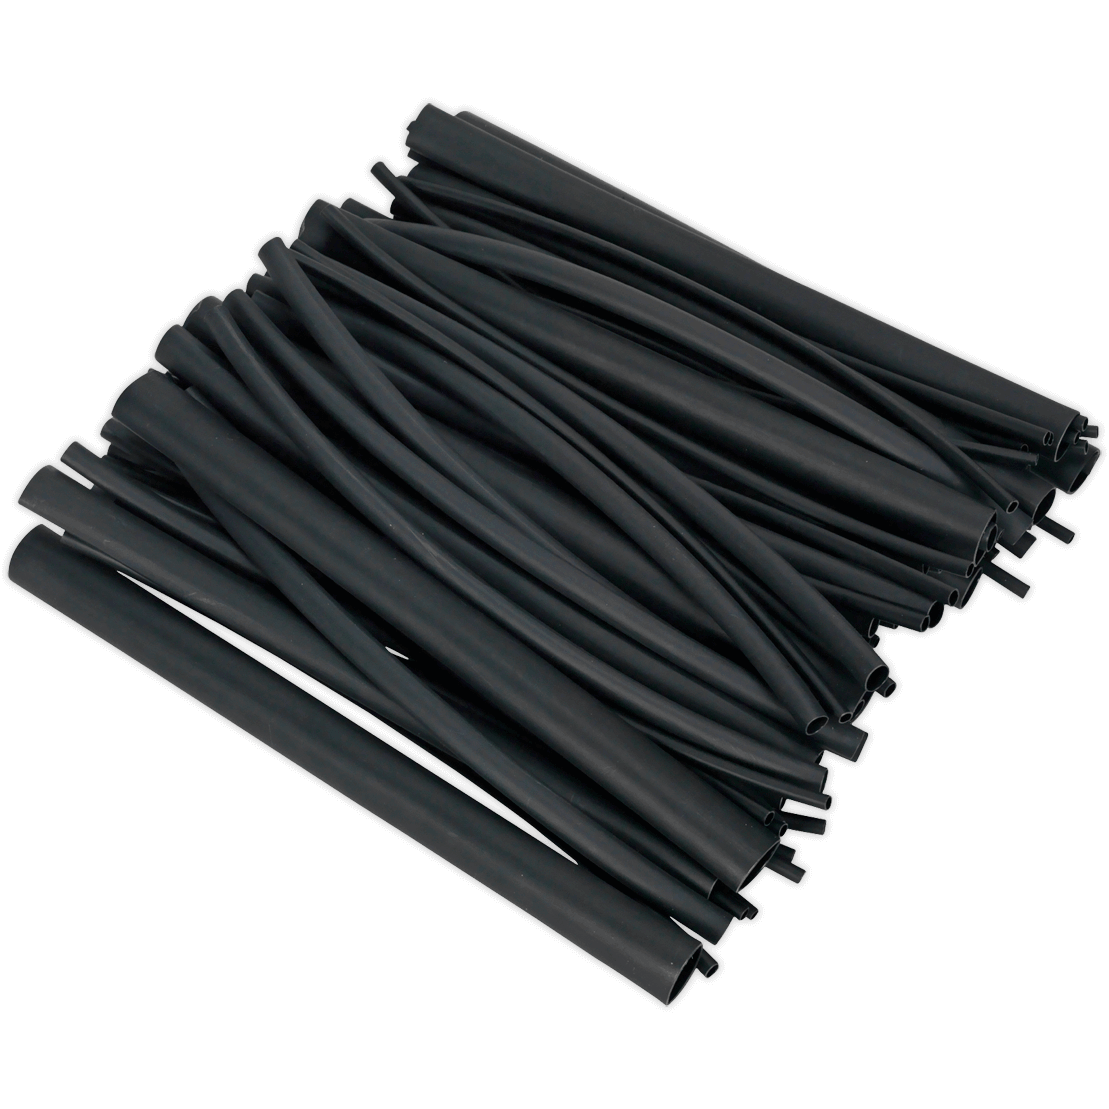 Sealey 72 Piece Adhesive Lined Heat Shrink Tubing Assortment Black